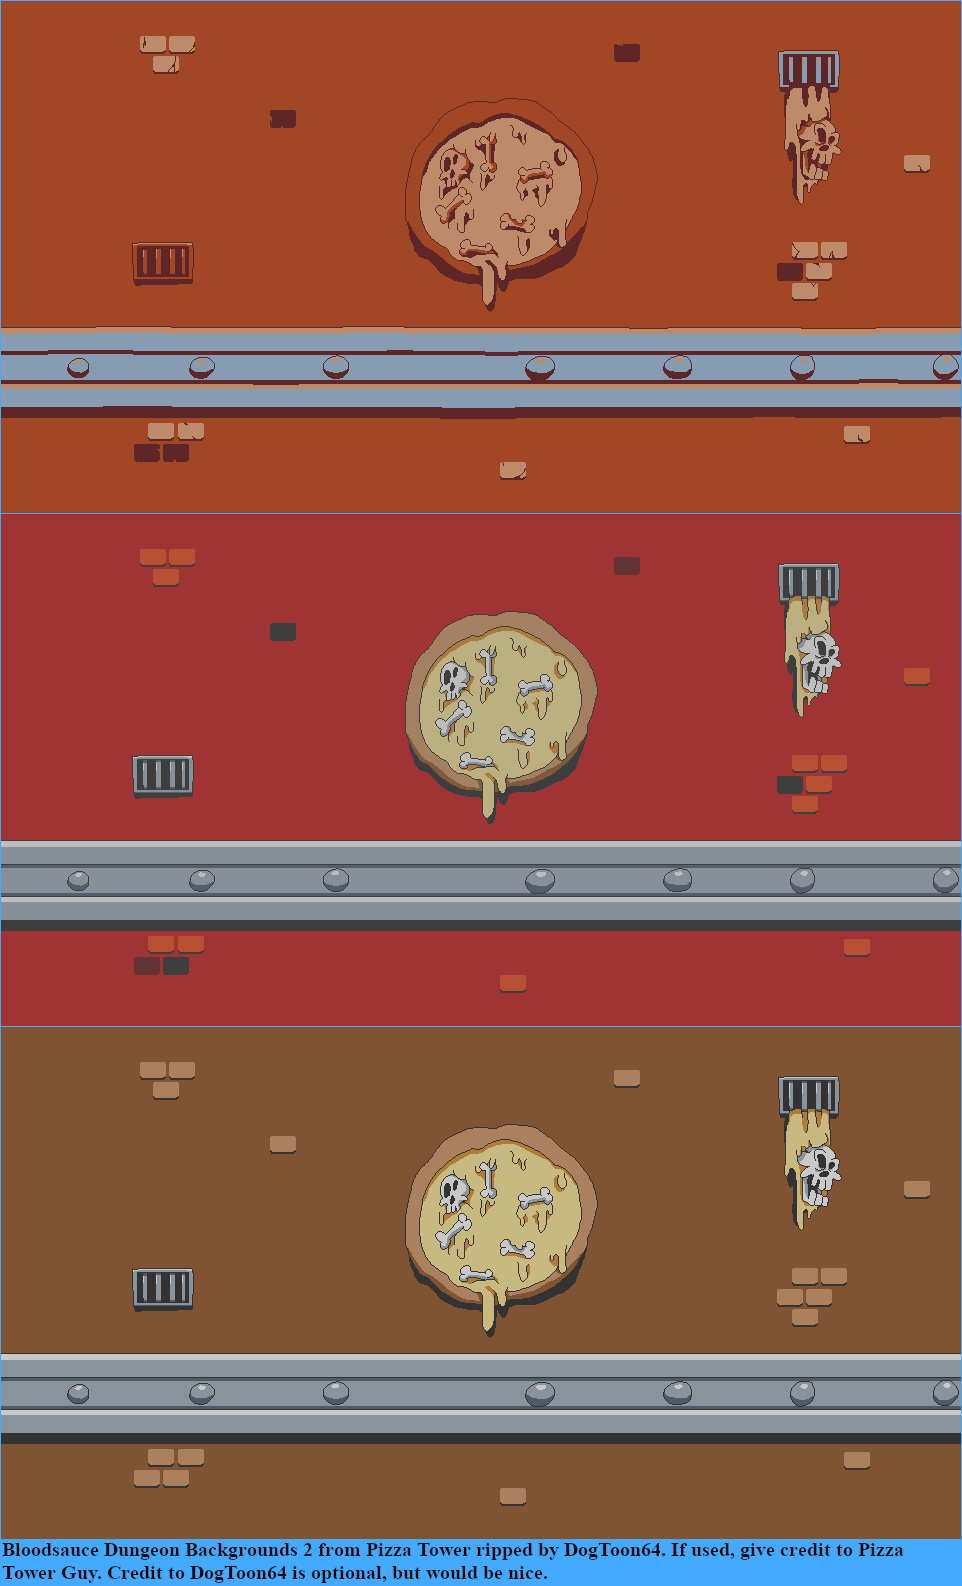 Pizza Tower - Bloodsauce Dungeon Backgrounds 4